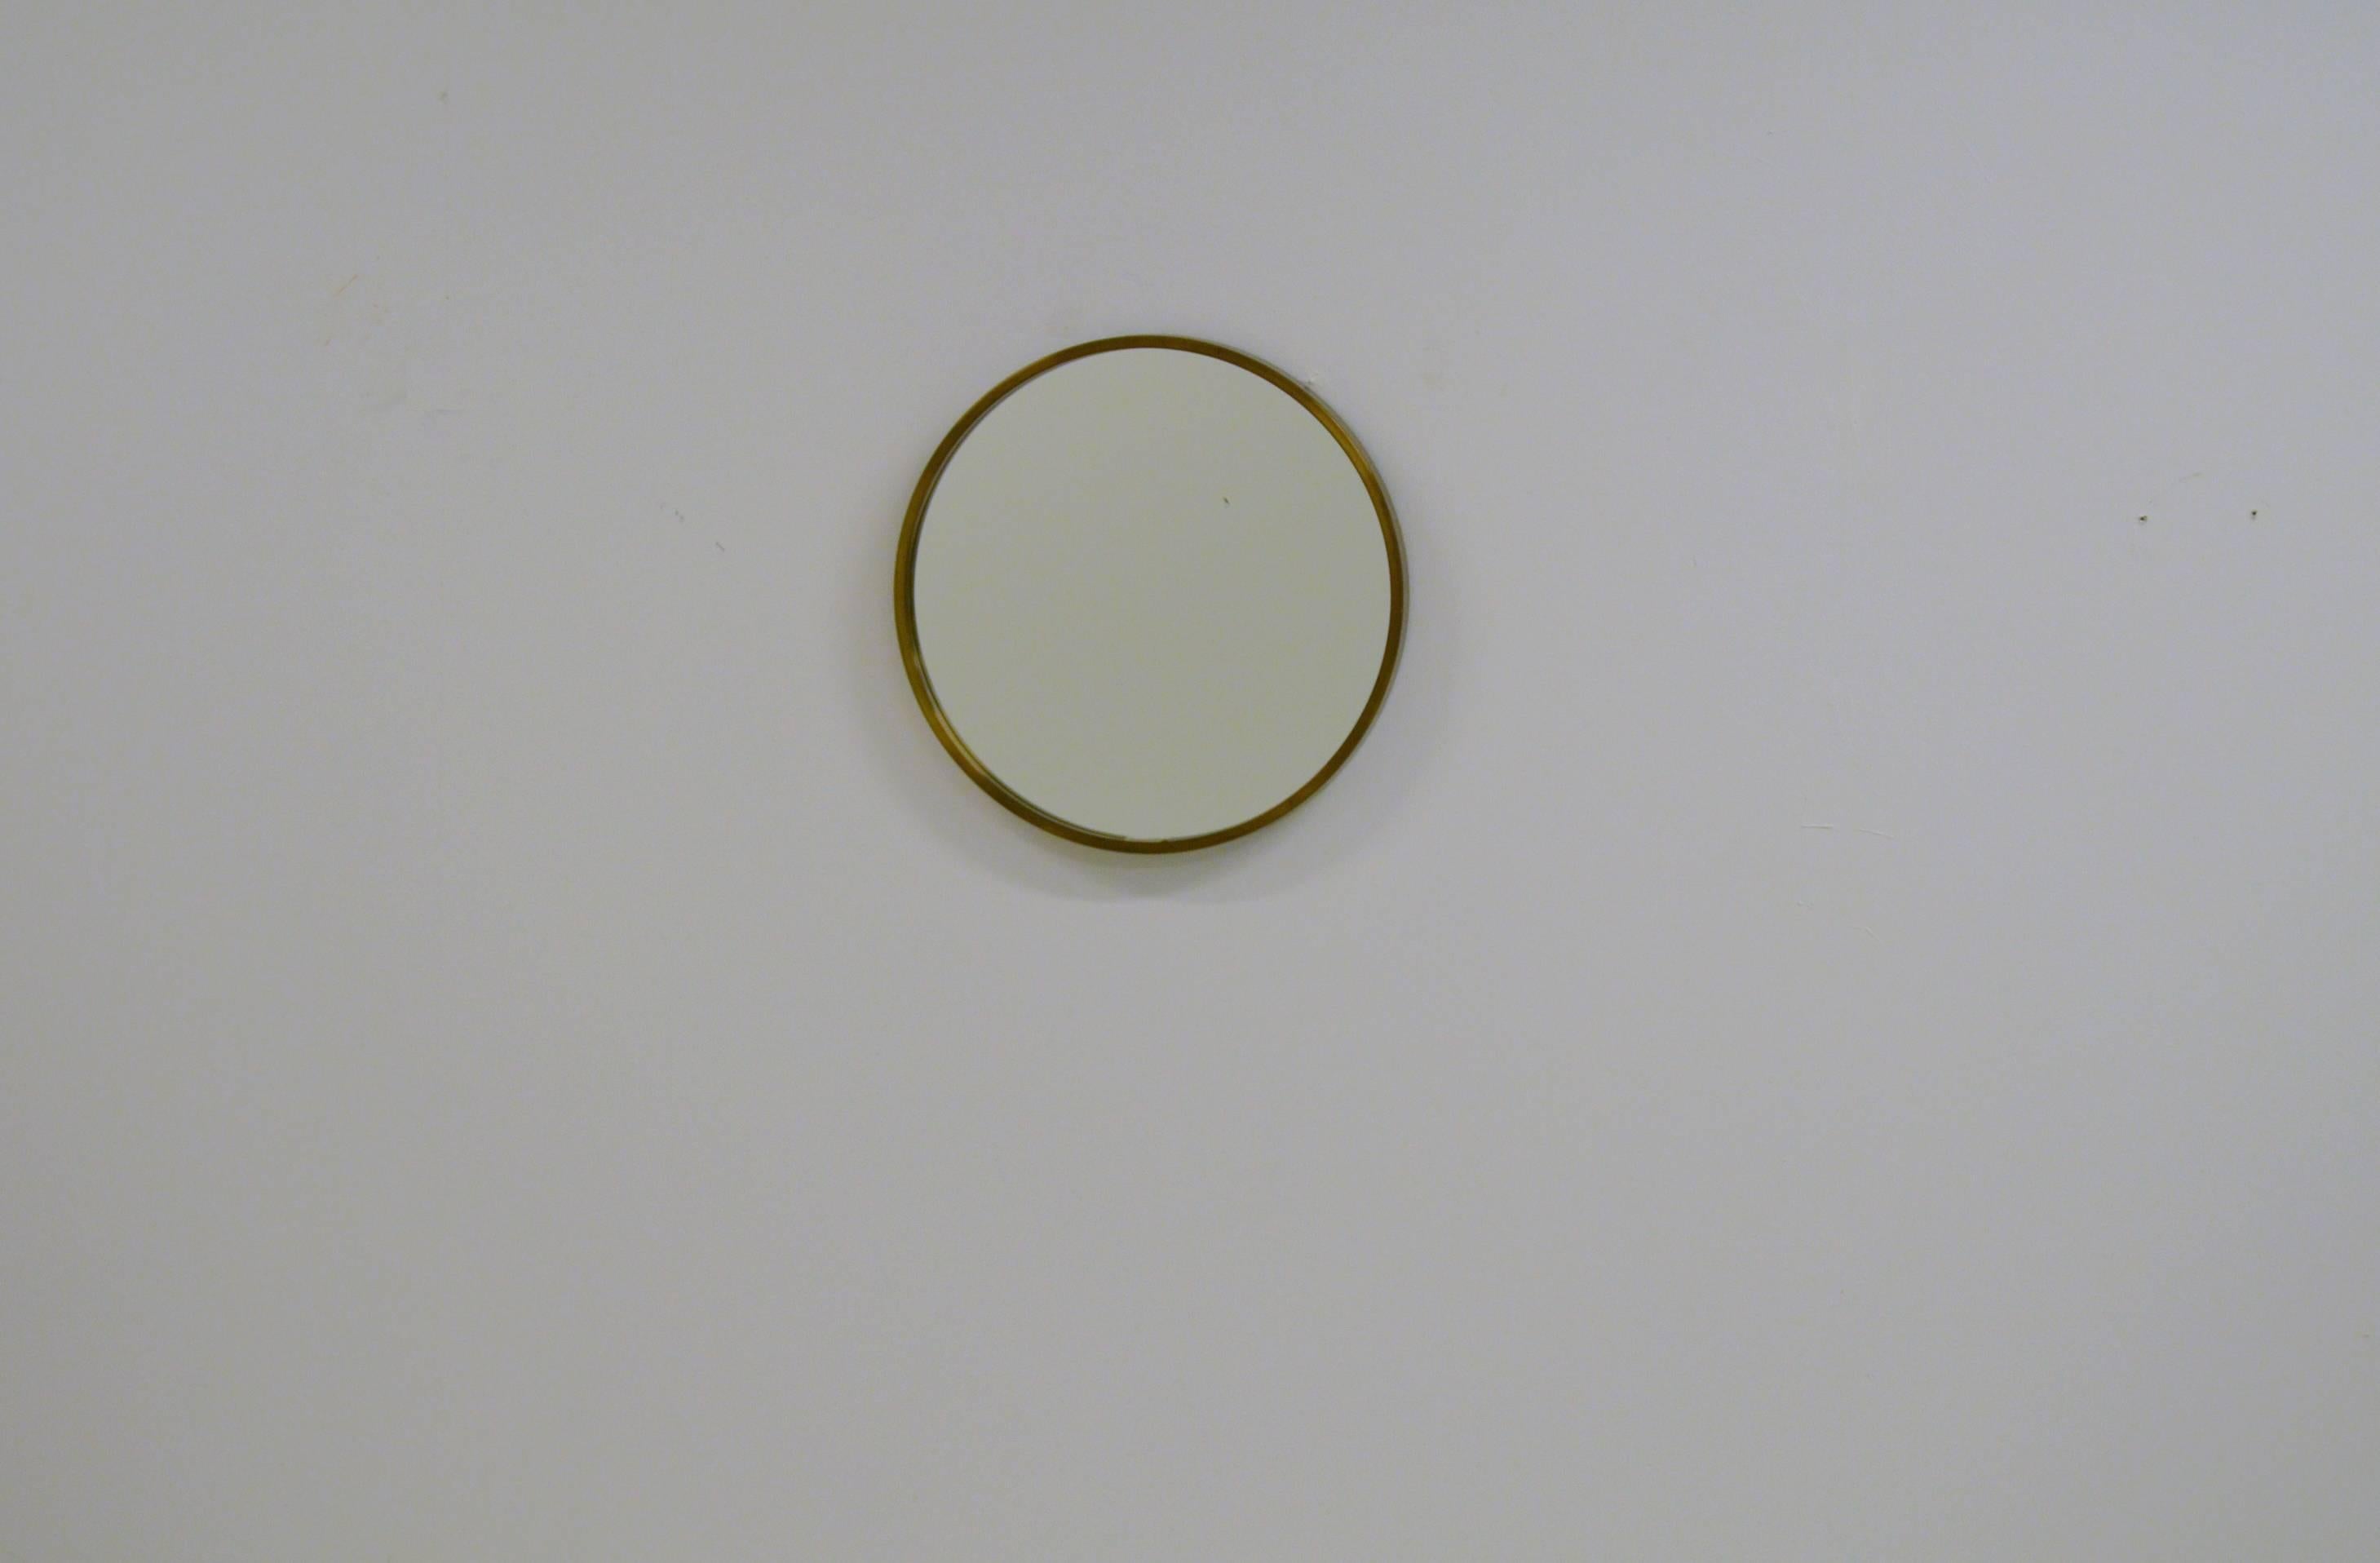 Round glass mirror from Glasmäster with brass frame. The glass has one permanent black spot in the glass.